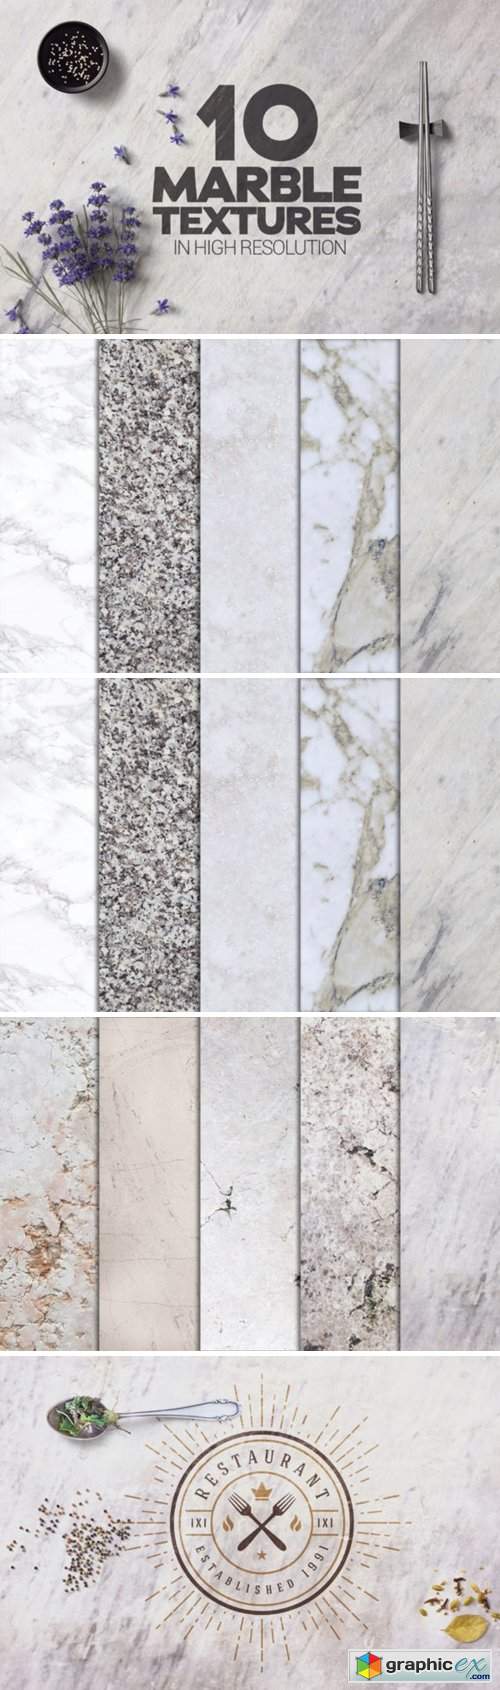 Marble Textures X10